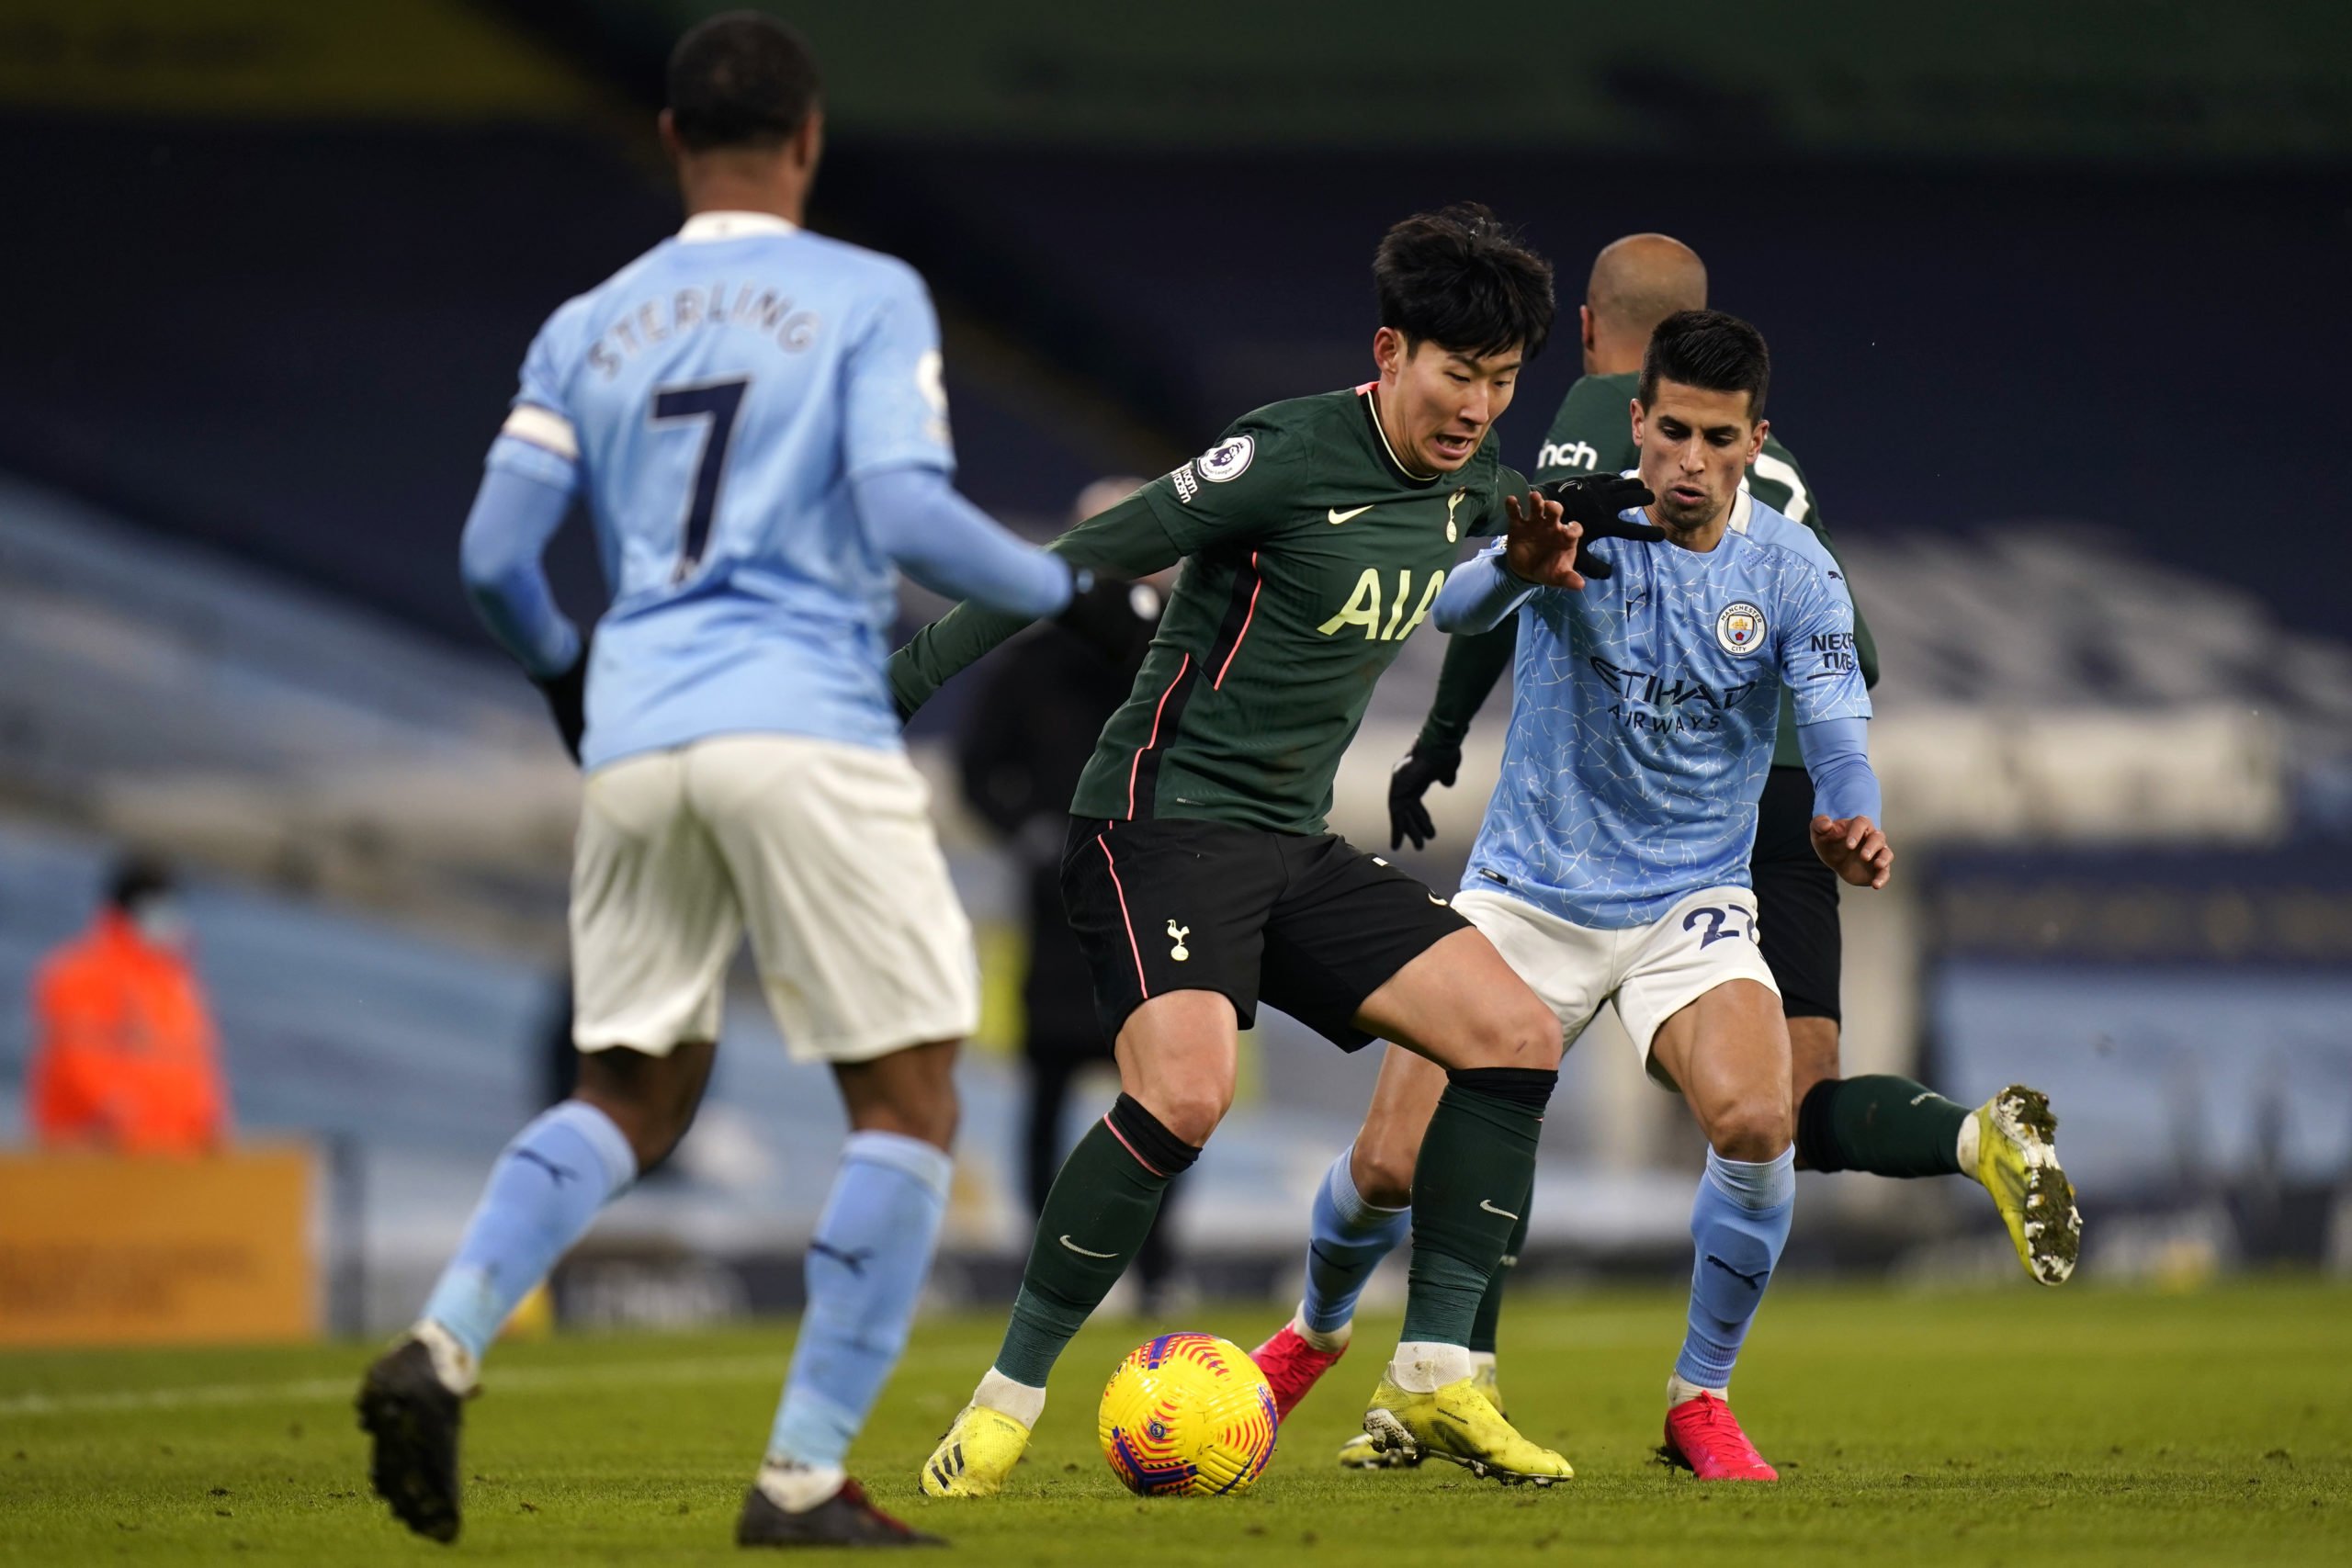 Tottenham Hotspur Players Rated In Defeat To Manchester City (Son Heung-min can be seen in the picture)